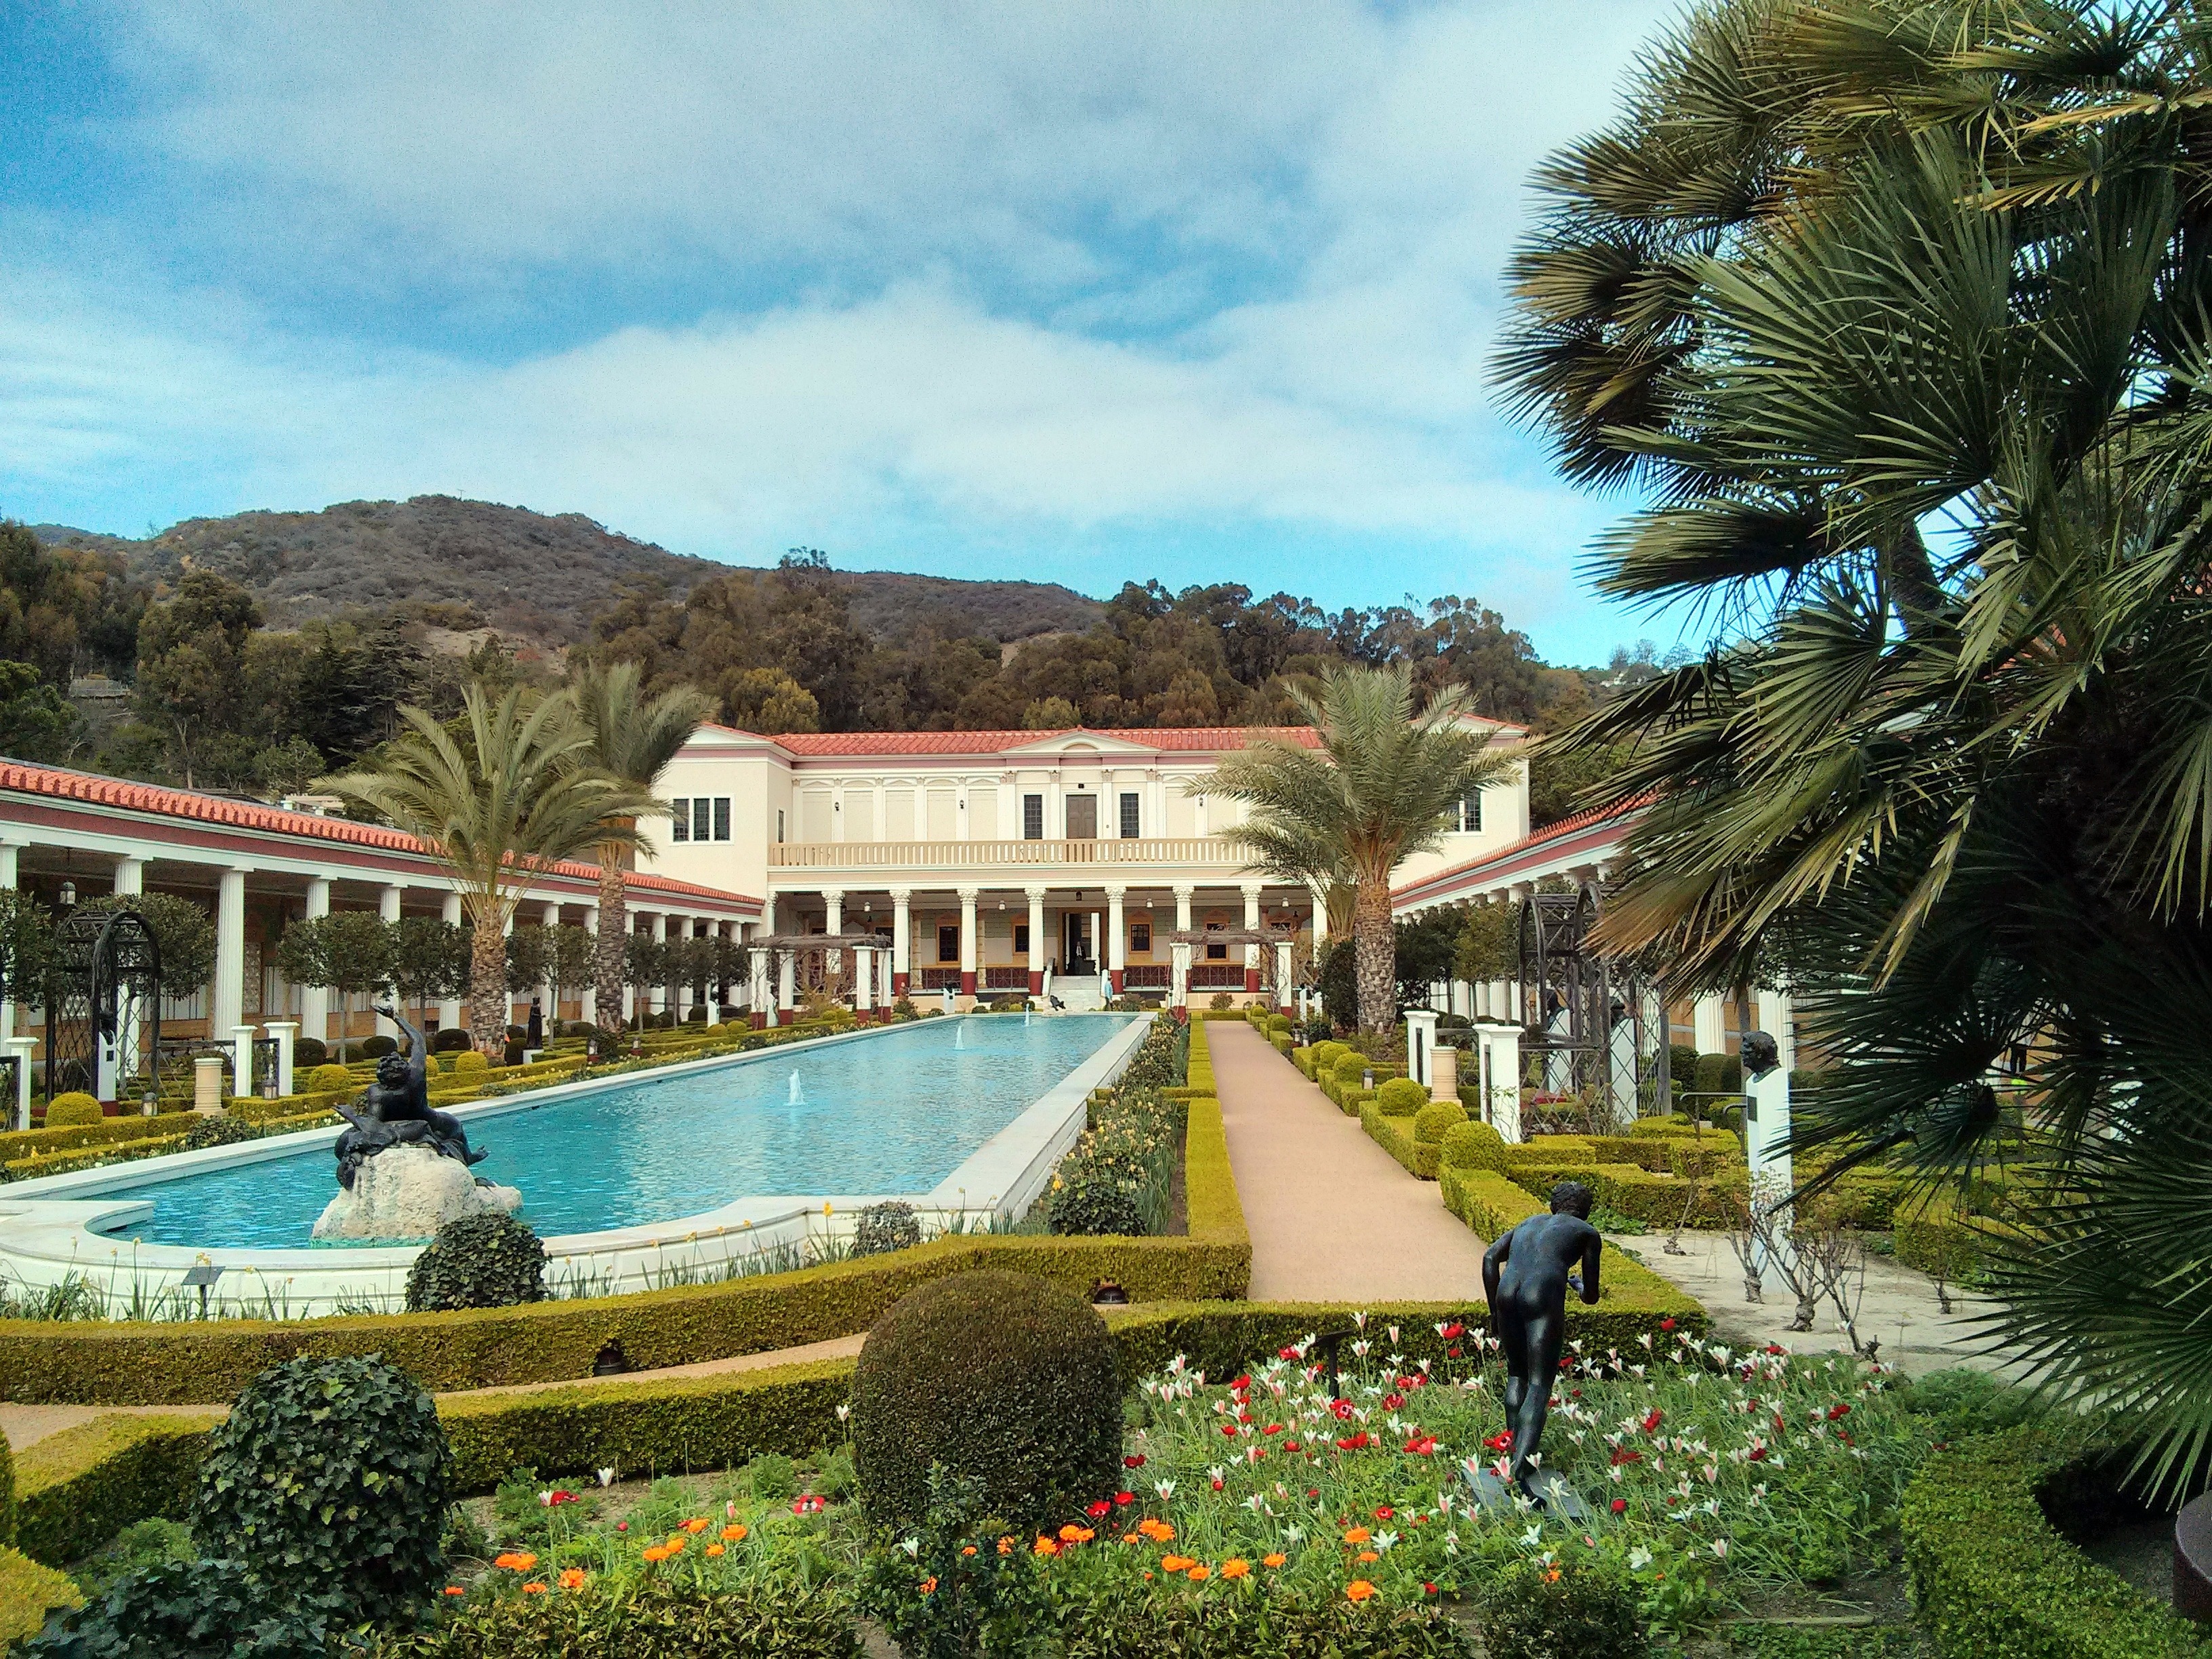 J. PAUL GETTY LIFE AND LEGACY OPENS AT THE GETTY CENTER 